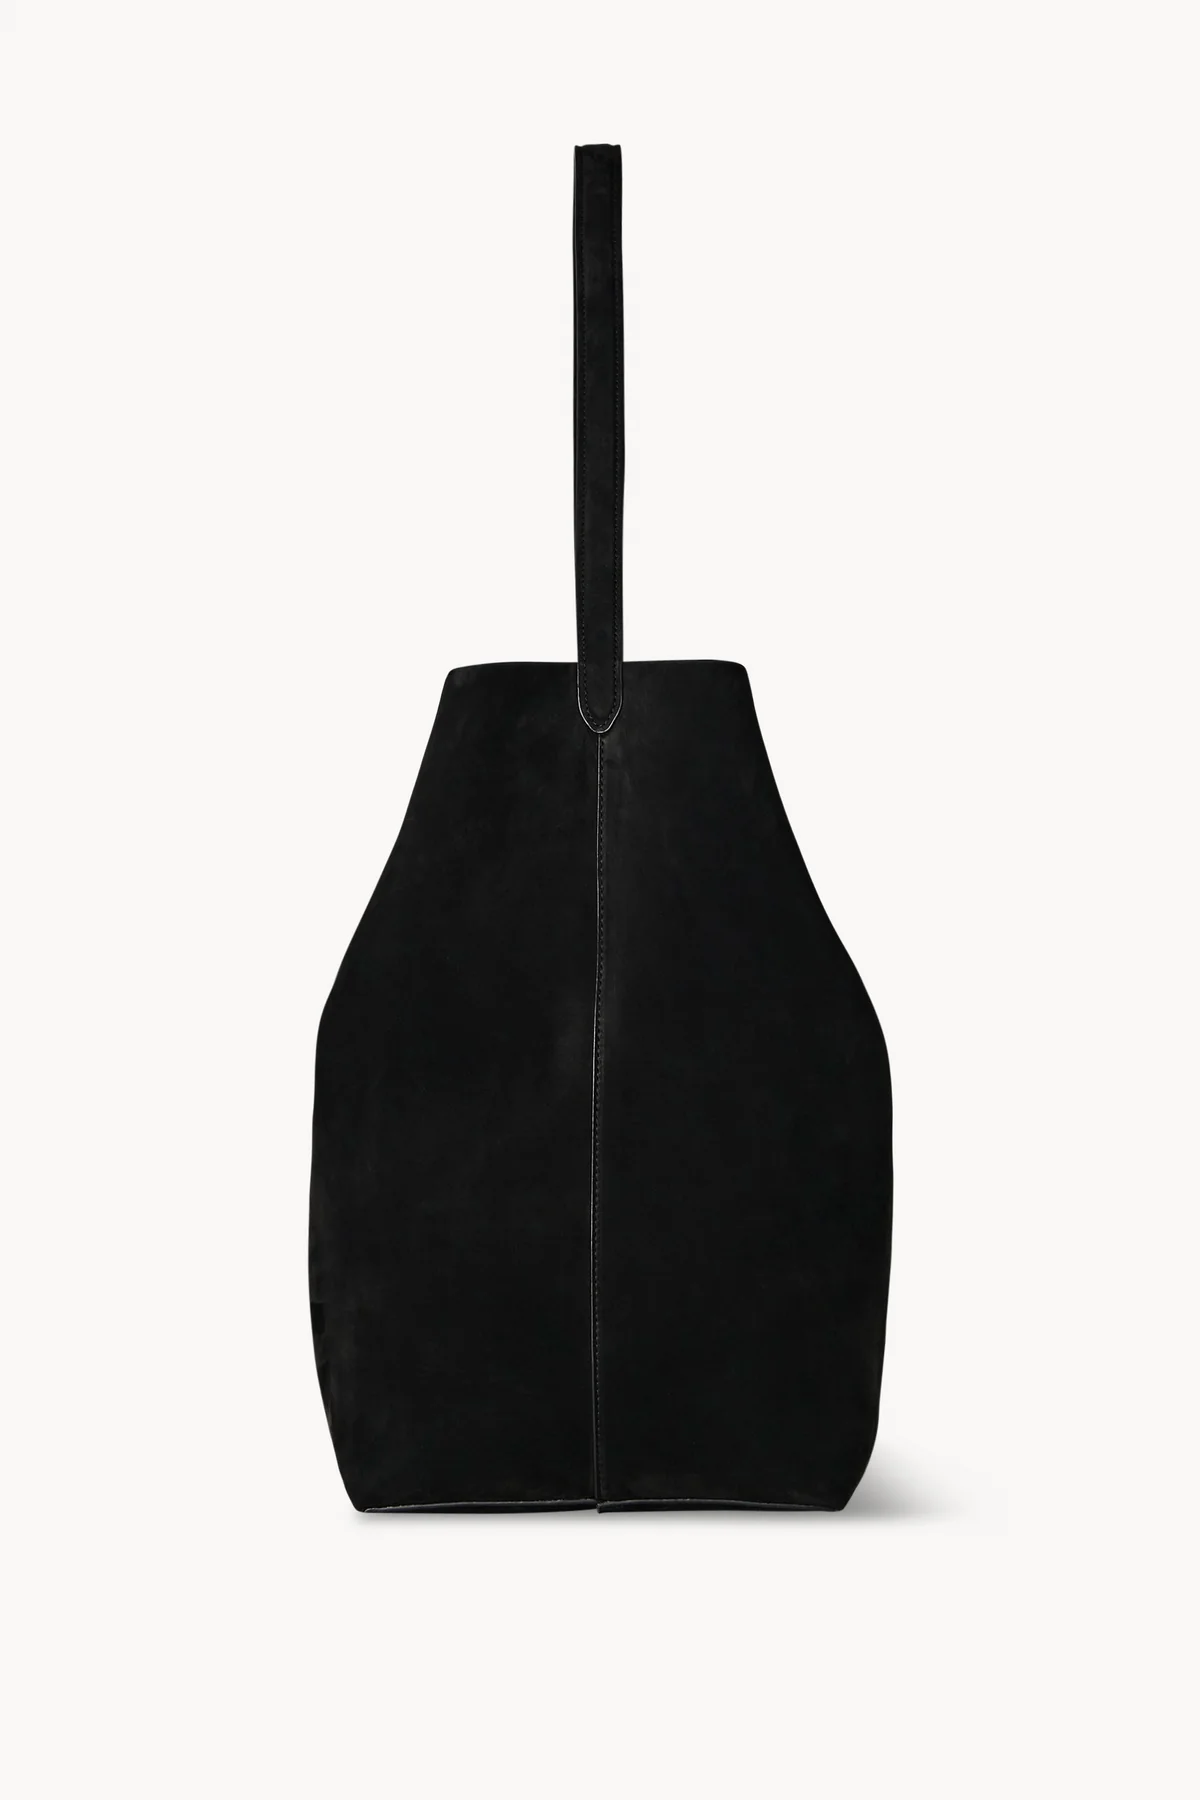 Shop The Row Large N/s Park Tote Bag In Blk Black